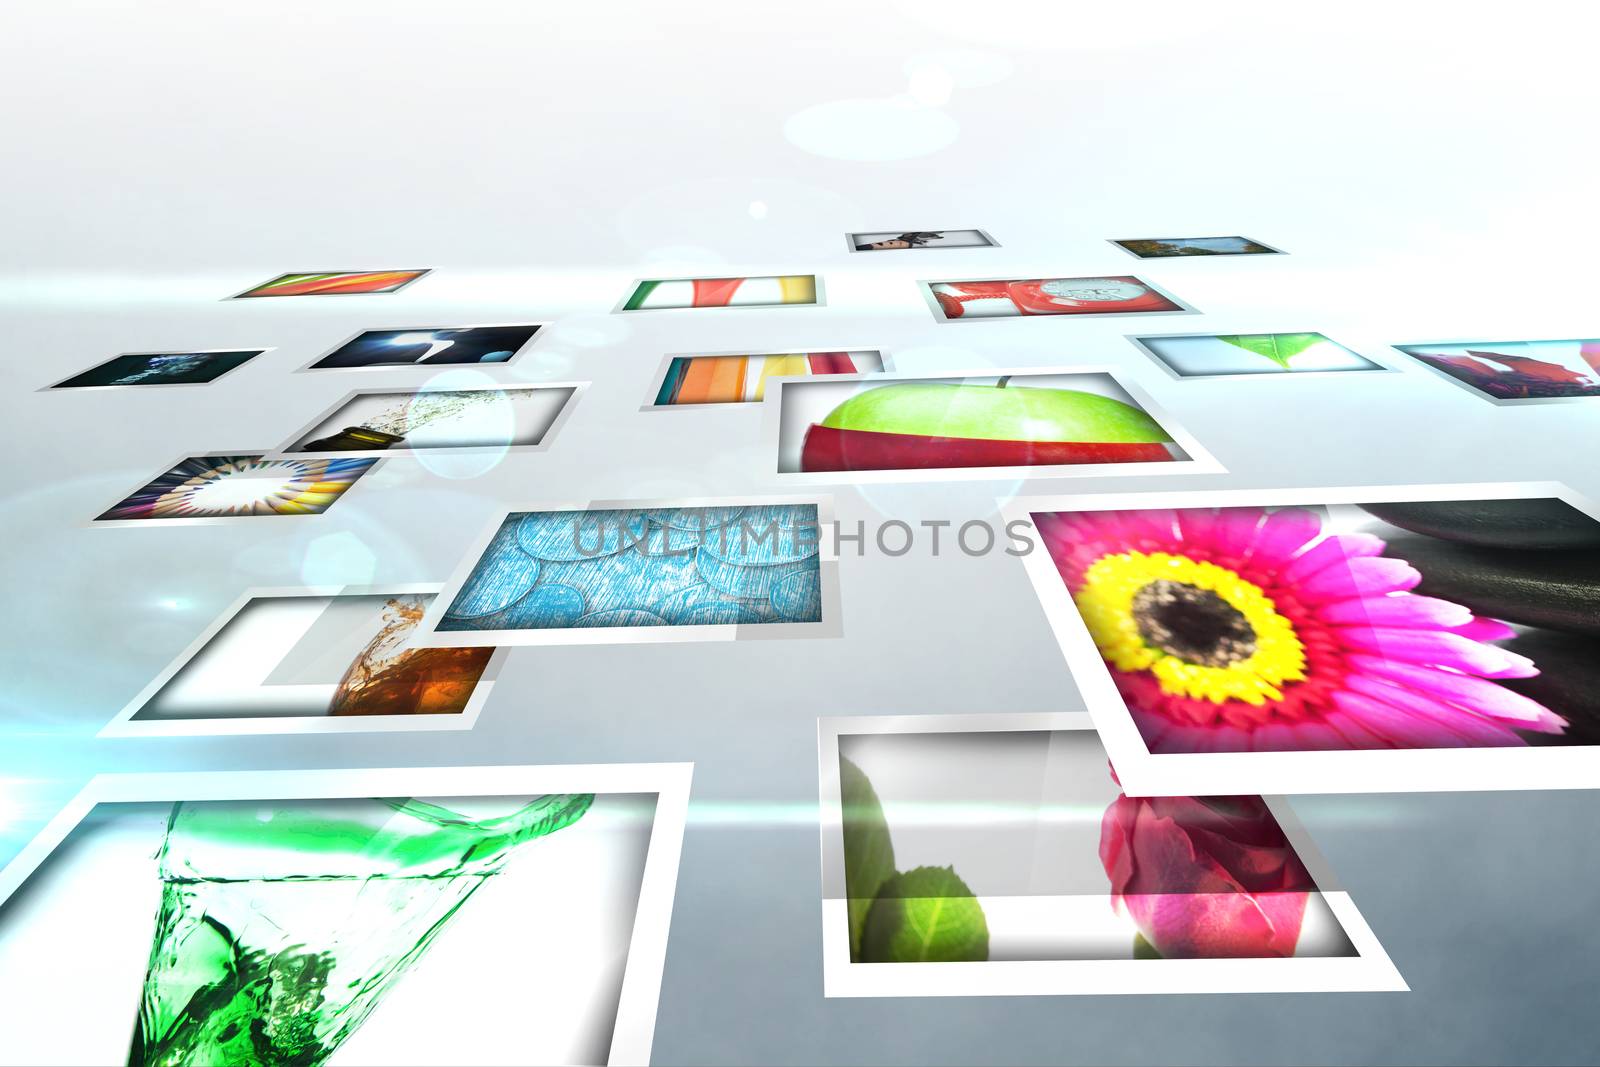 Digital composite of screen collage showing lifestyle images